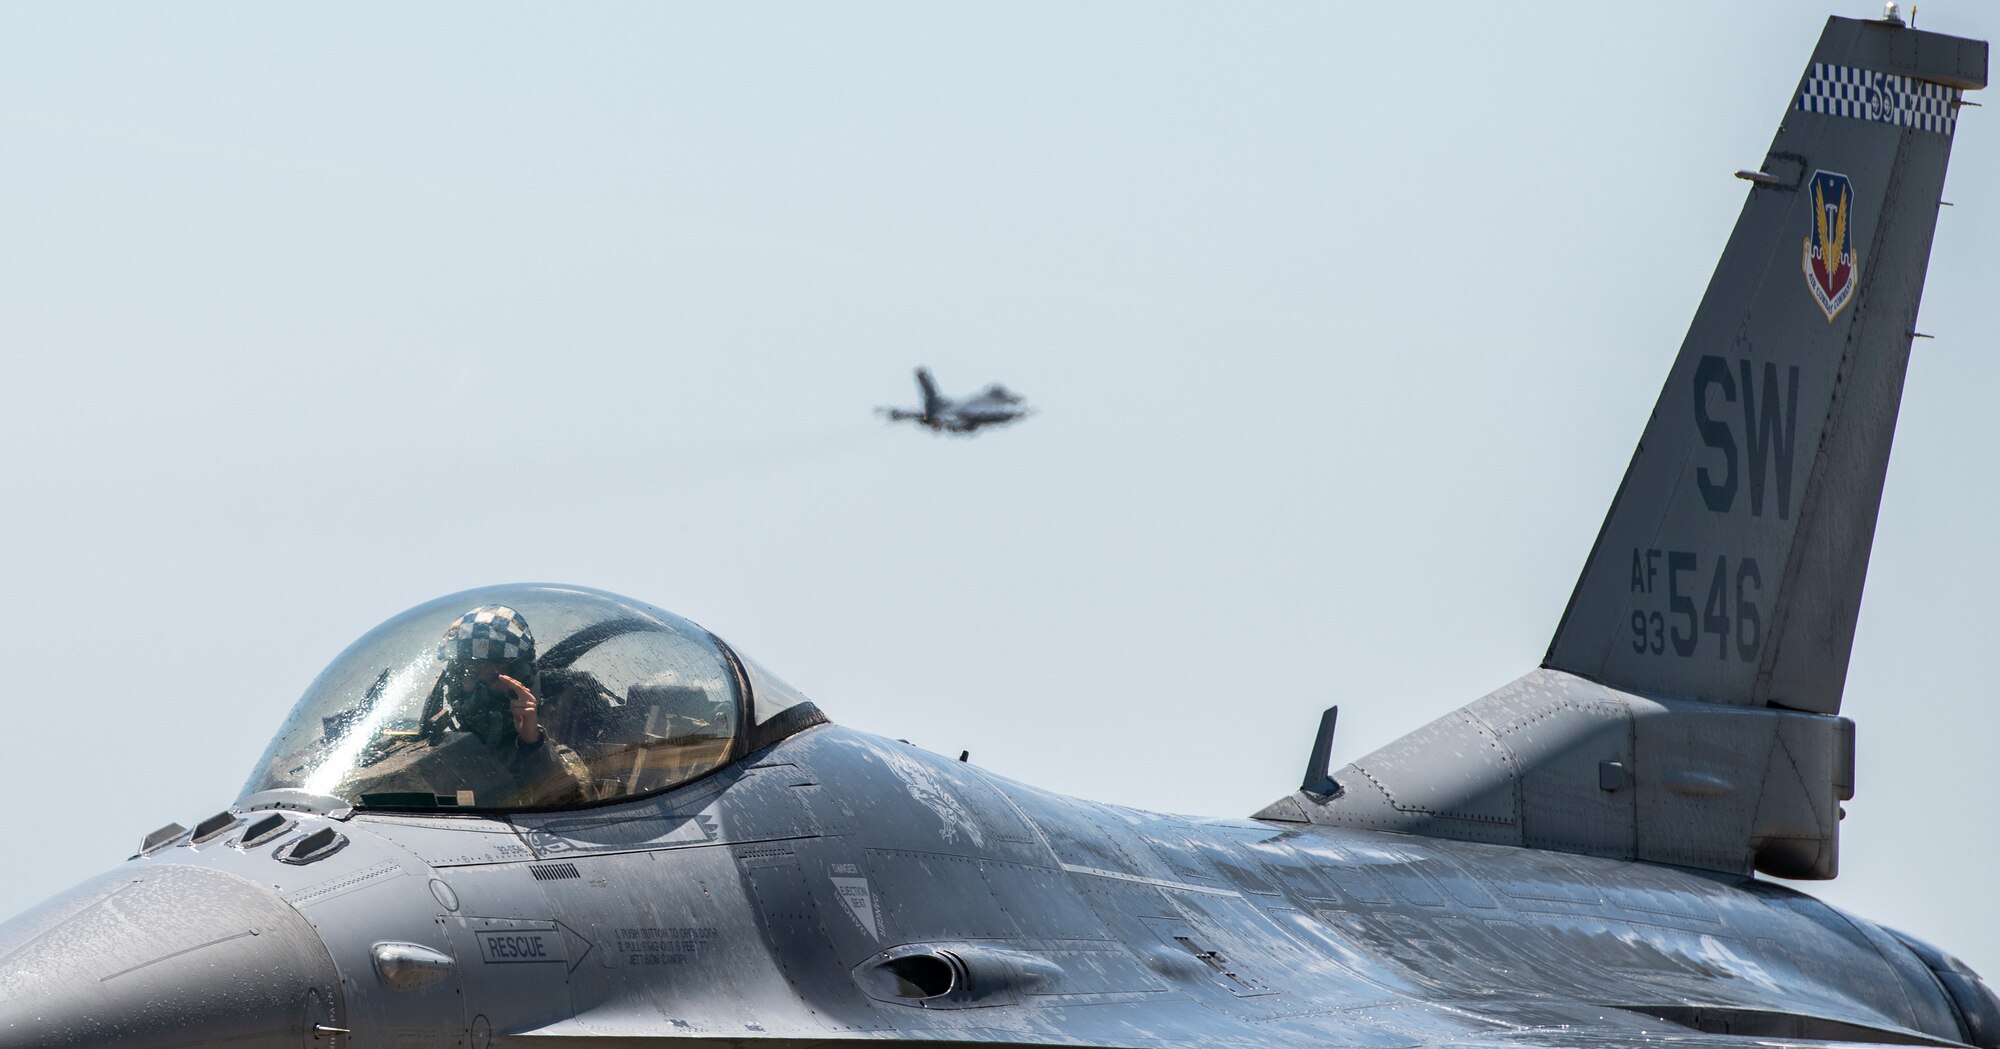 A U.S. Air Force pilot assigned to the 55th Fighter Squadron taxis on the runway after returning from a deployment to an undisclosed location in Southwest Asia to Shaw Air Force Base, S.C., April 30, 2019.